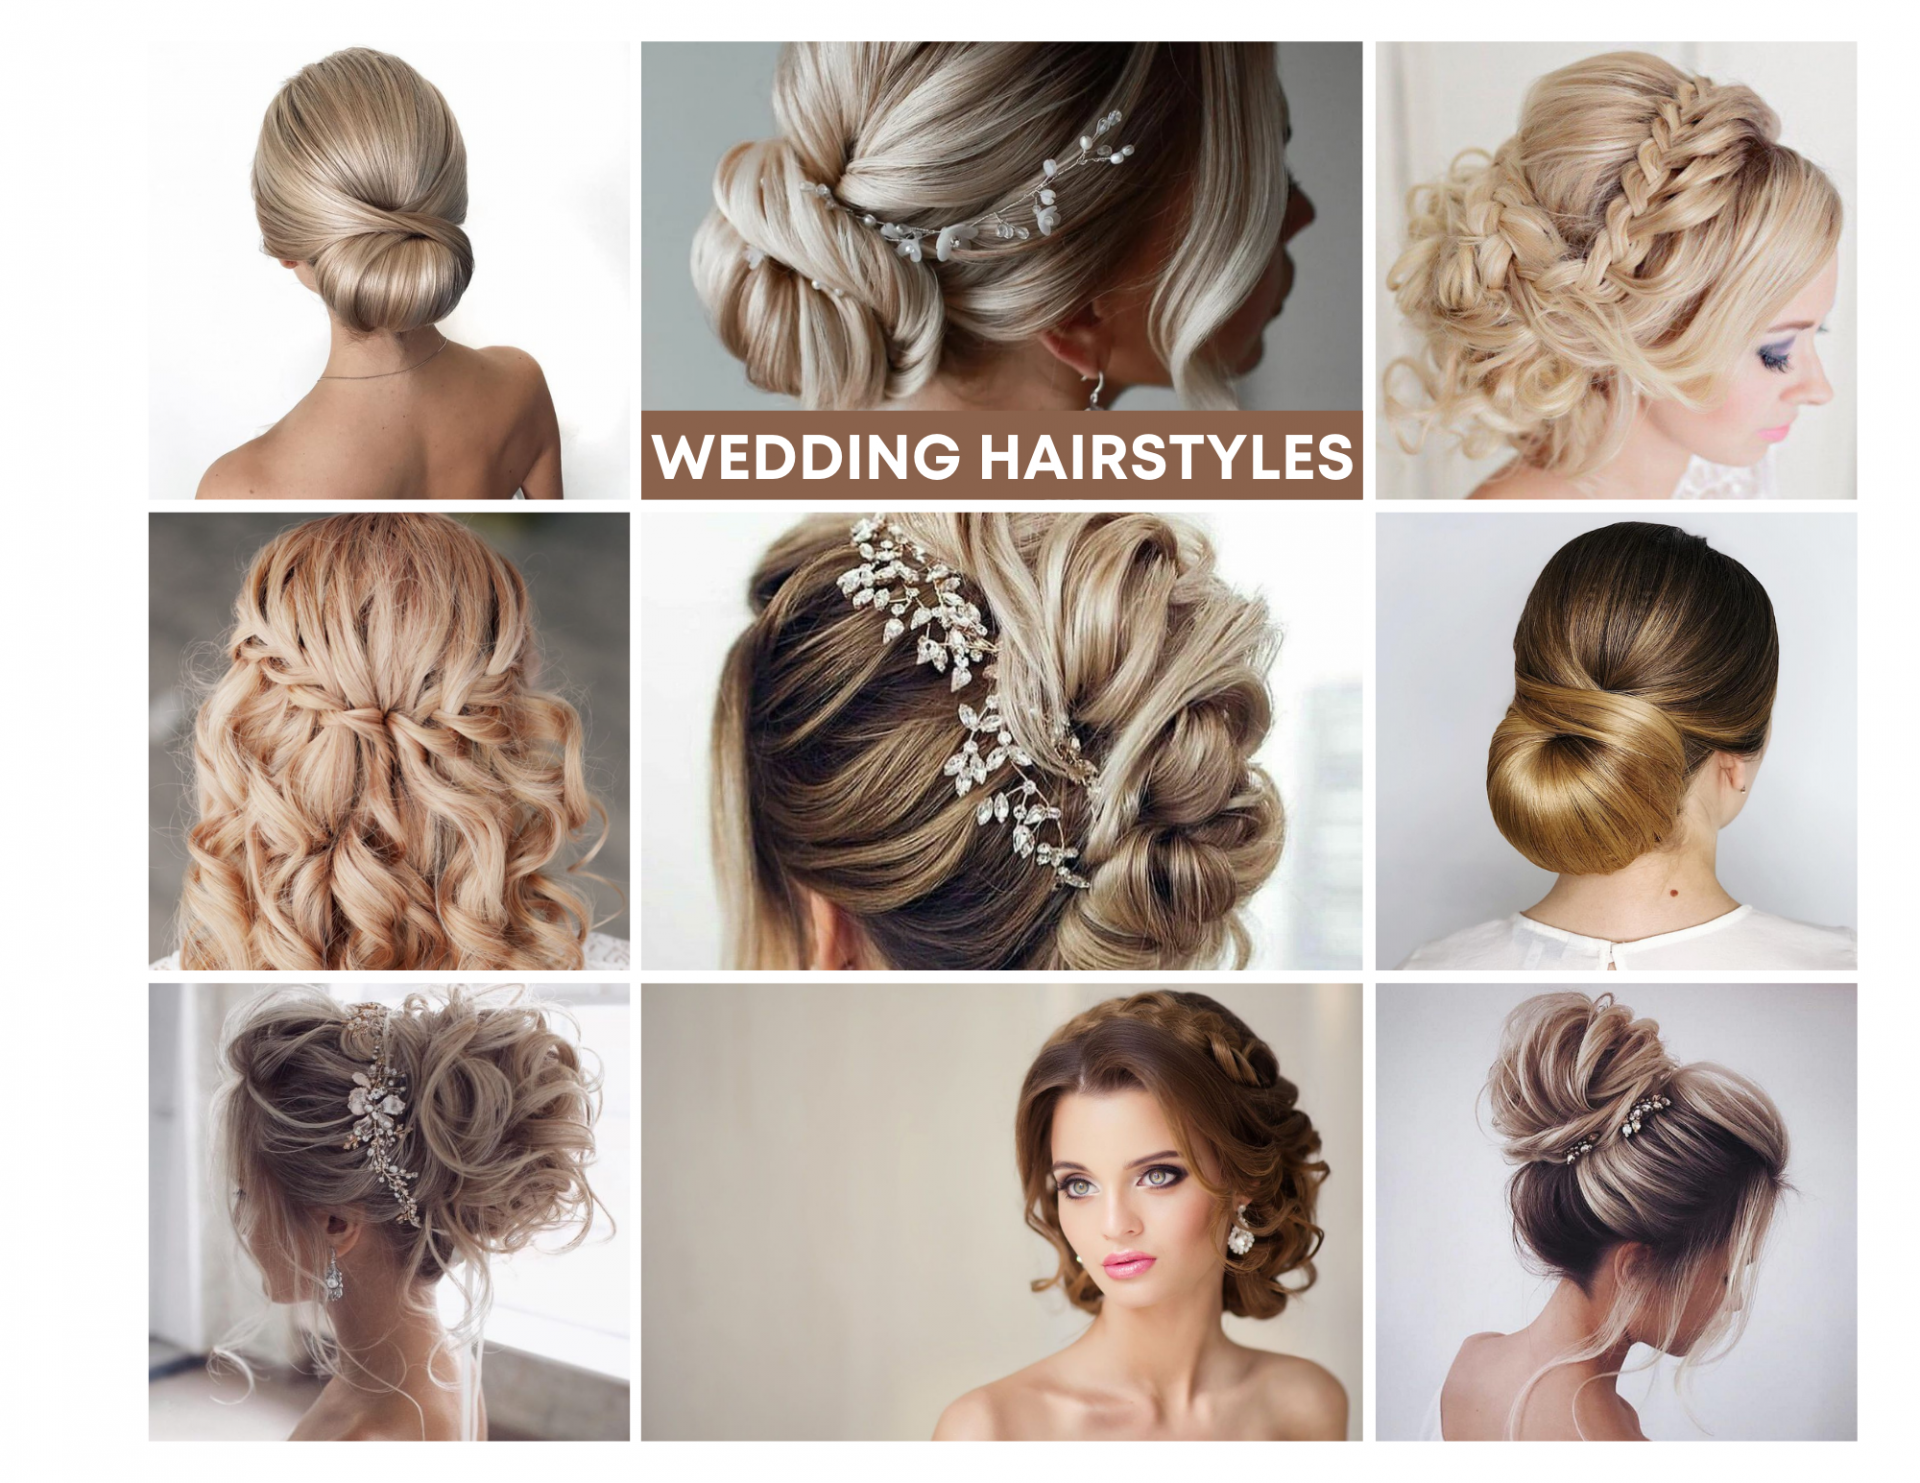 Wedding hairstyles and hairstyles of women